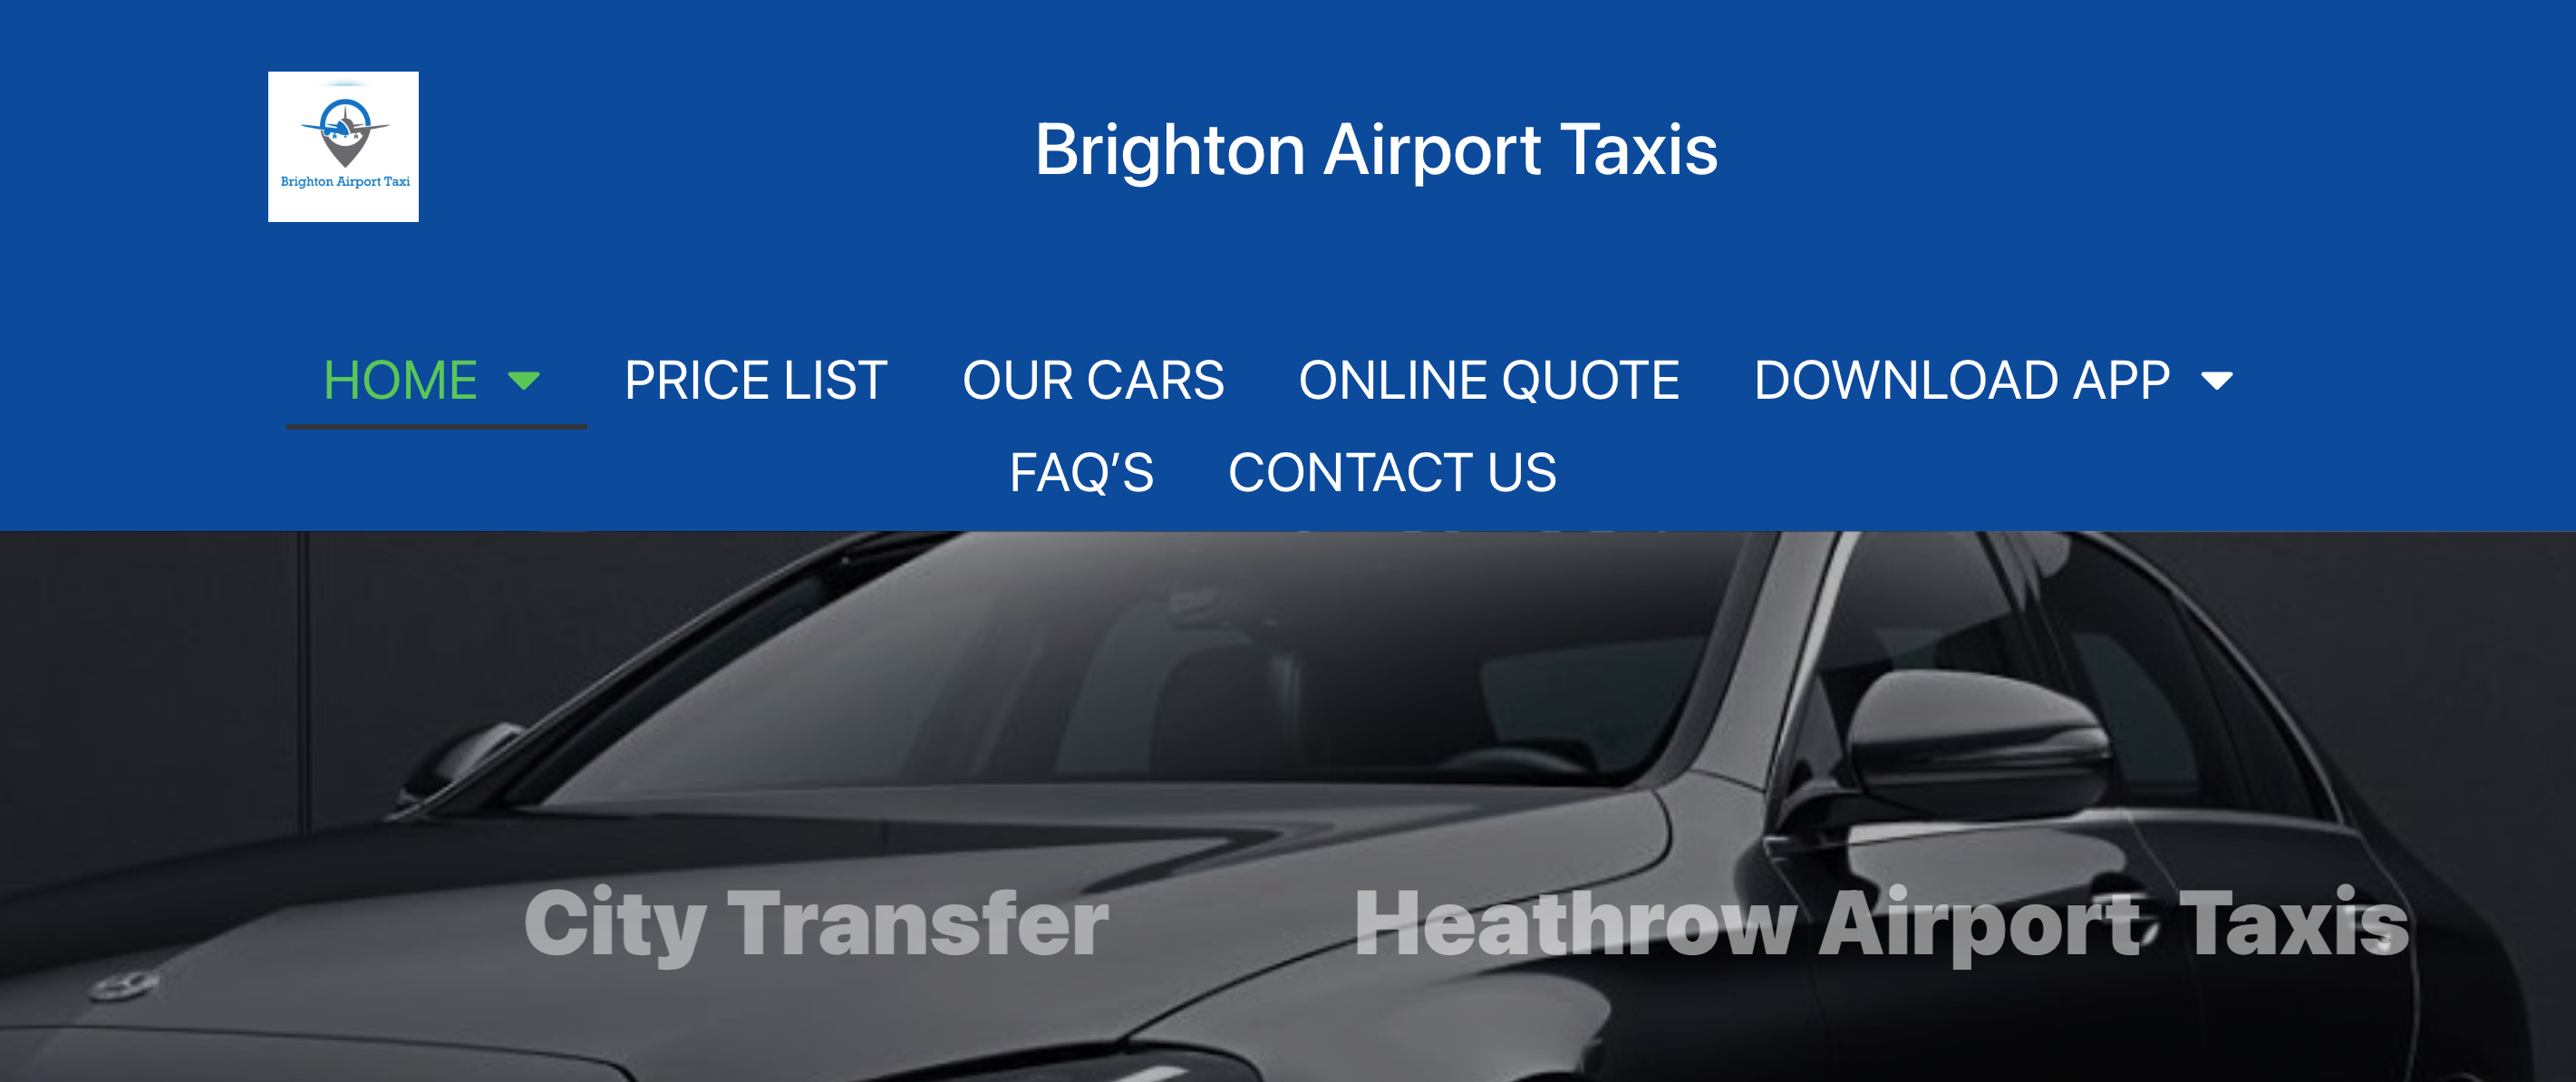 brighton airport taxis